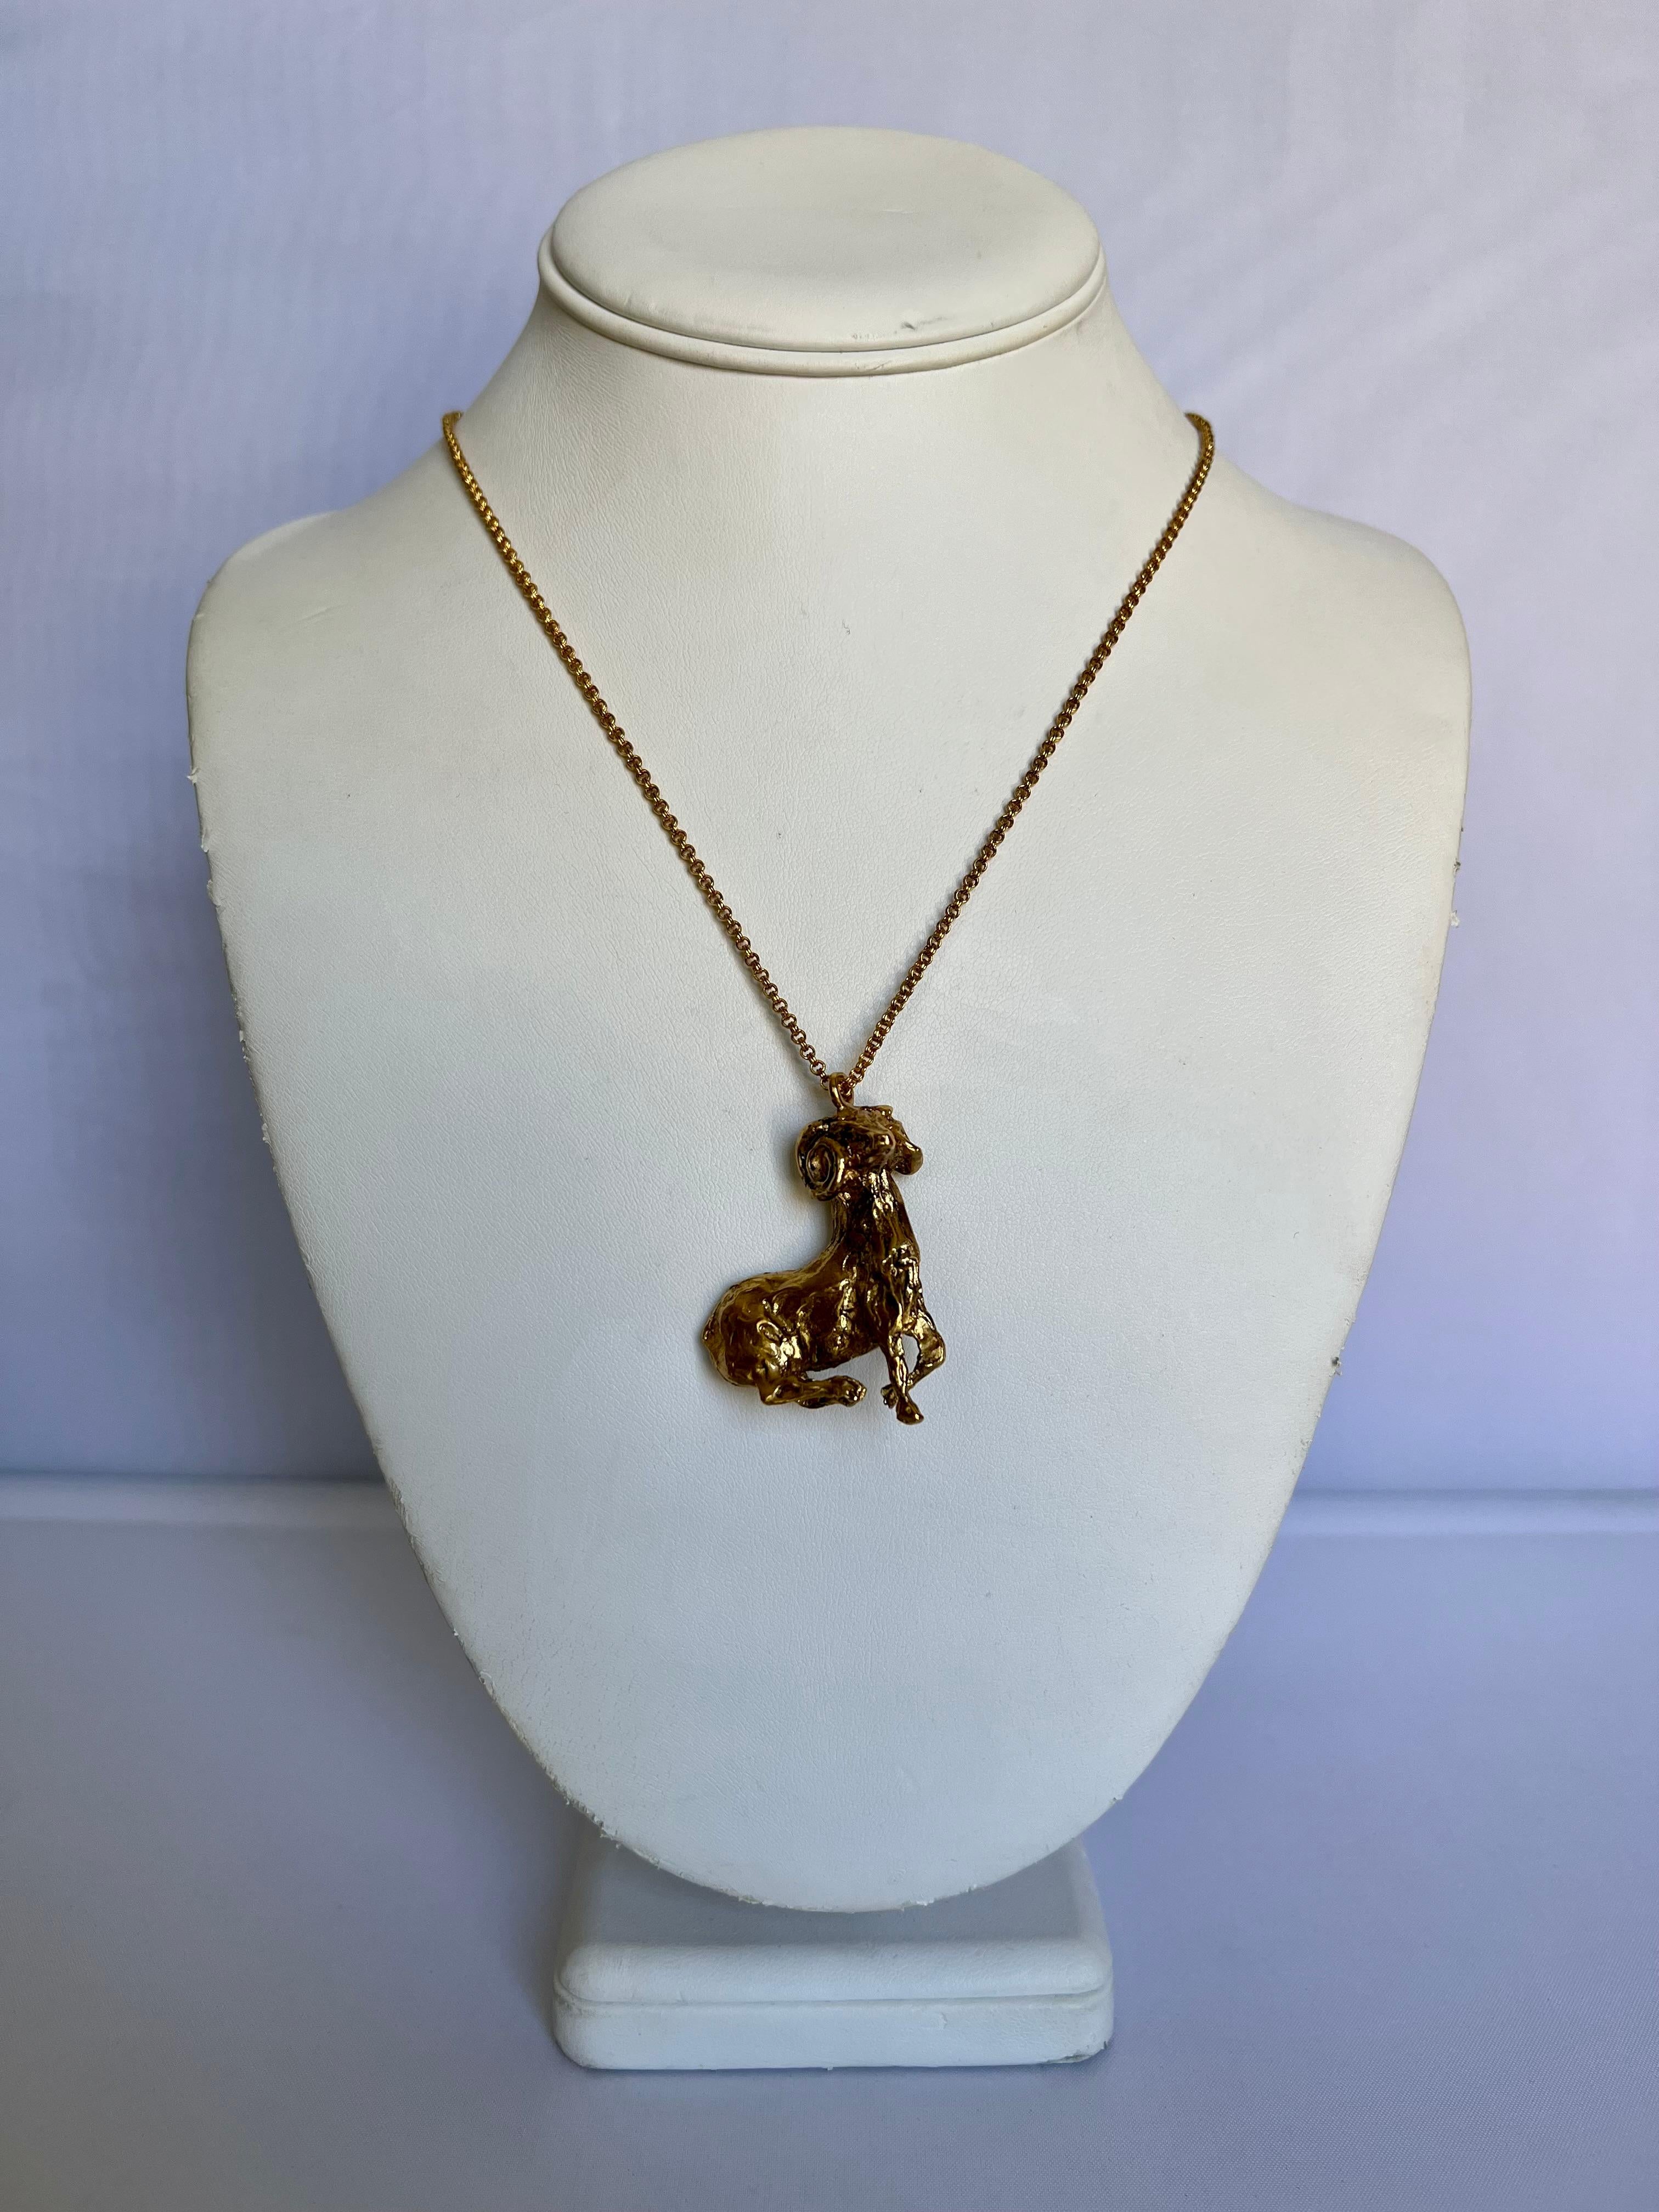 Gilded Bronze Capricorn French Pendant Necklace  In Excellent Condition For Sale In Palm Springs, CA